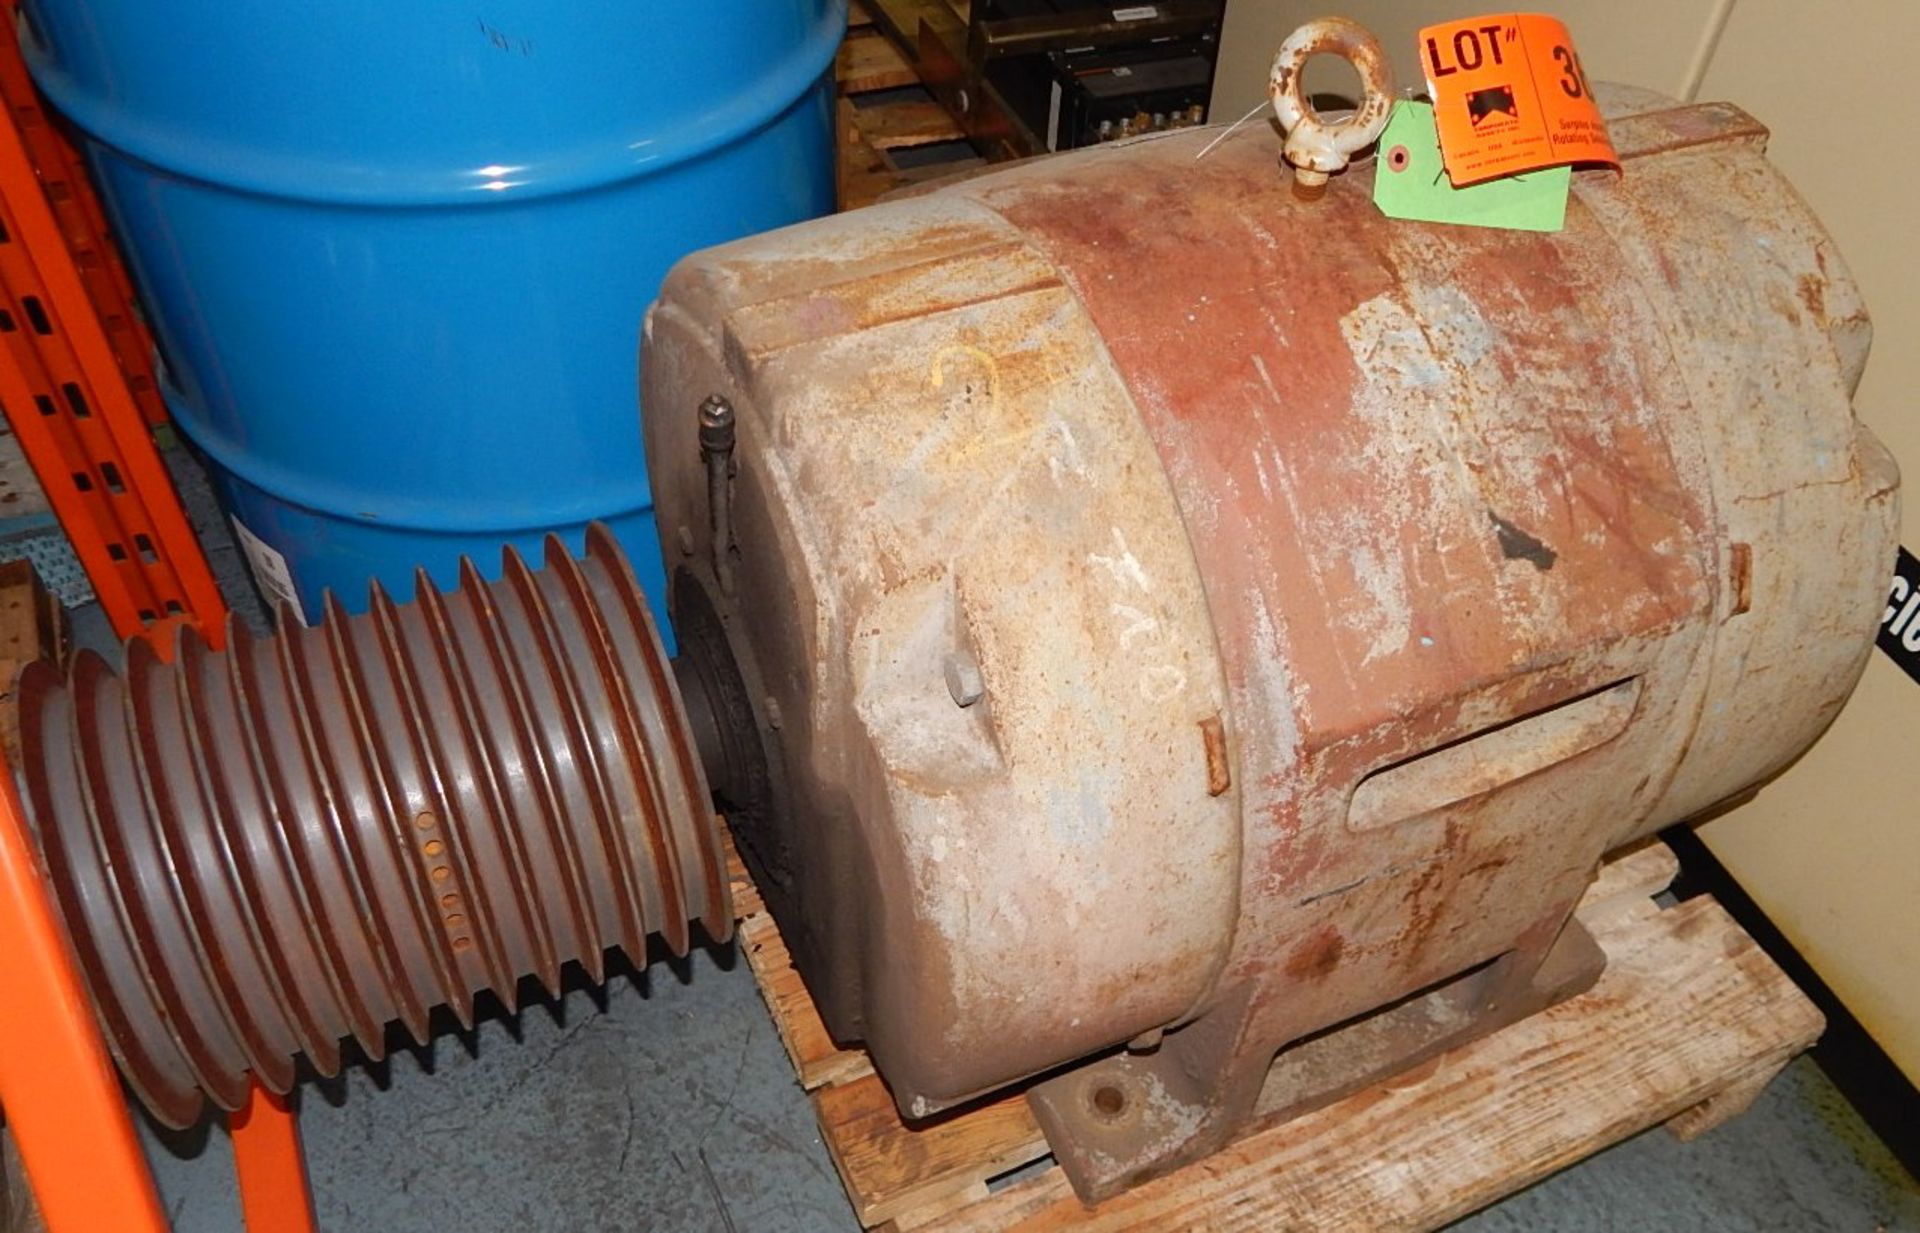 CANADIAN GENERAL ELECTRIC 150 HP ELECTRIC MOTOR WITH 1775 RPM, 575V, 3 PHASE, 60 HZ (CI) [RIGGING - Image 2 of 4